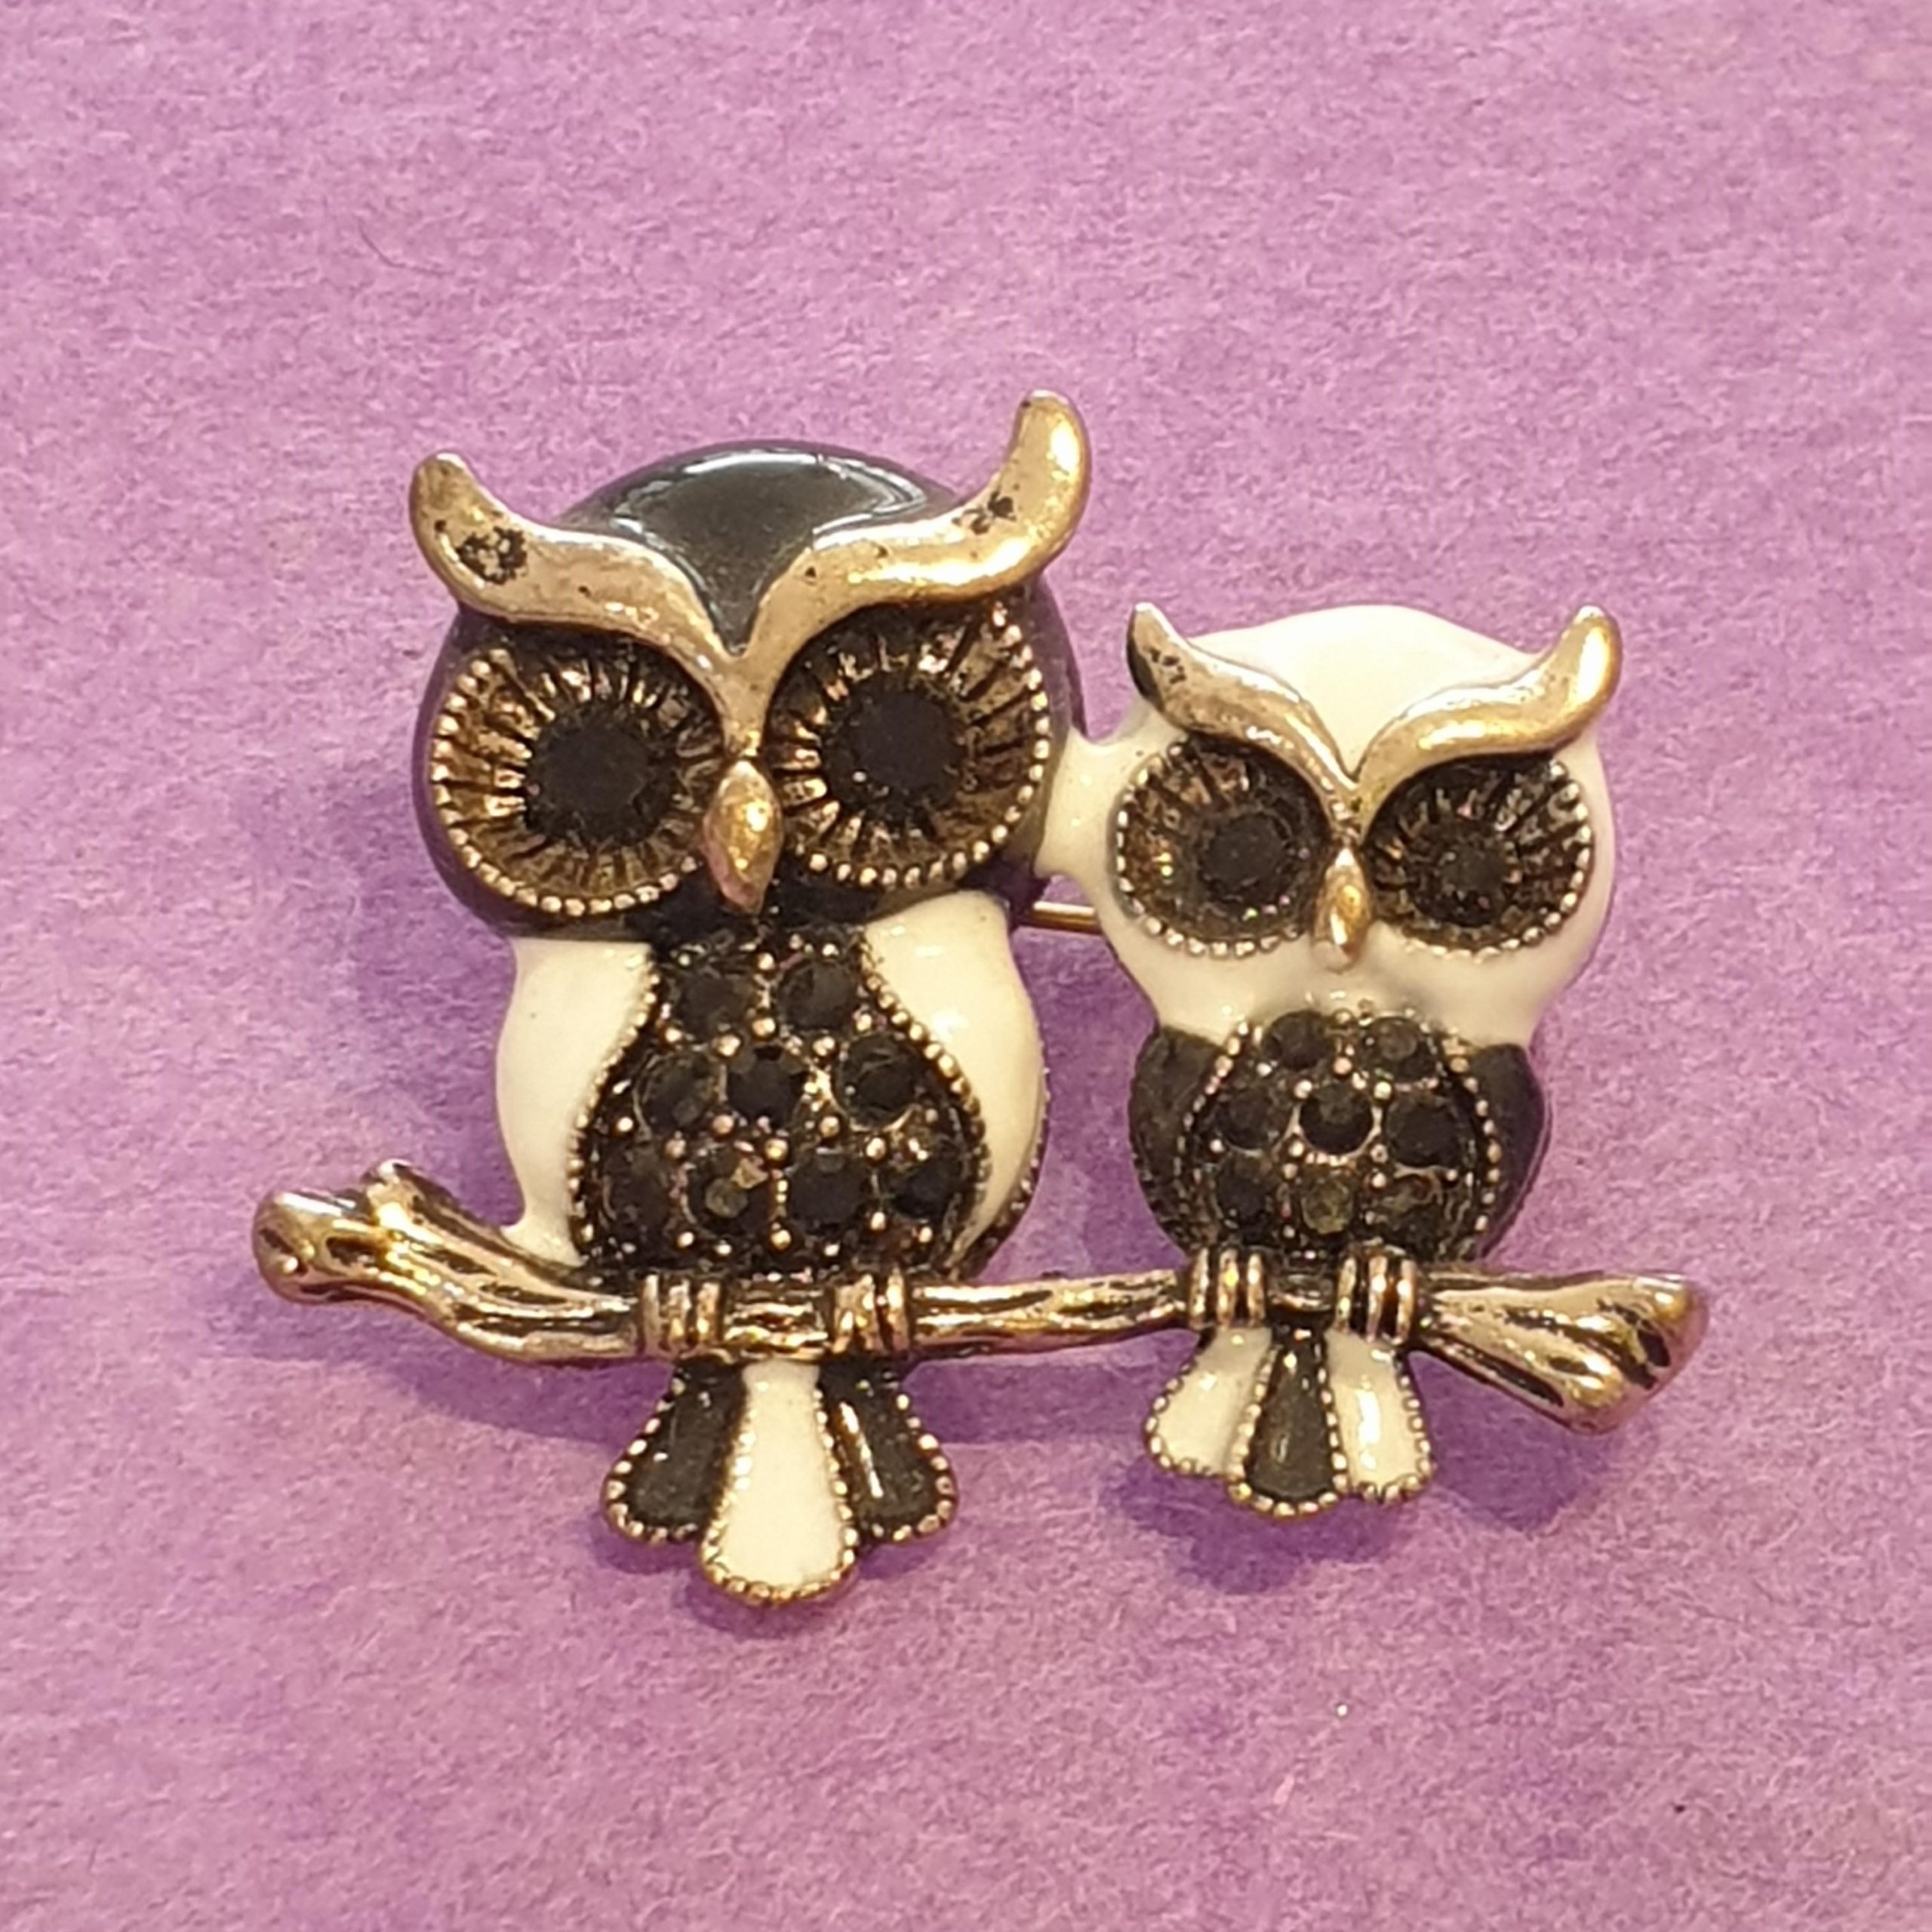 Owl Brooch In Black And White Enamel Silver 54